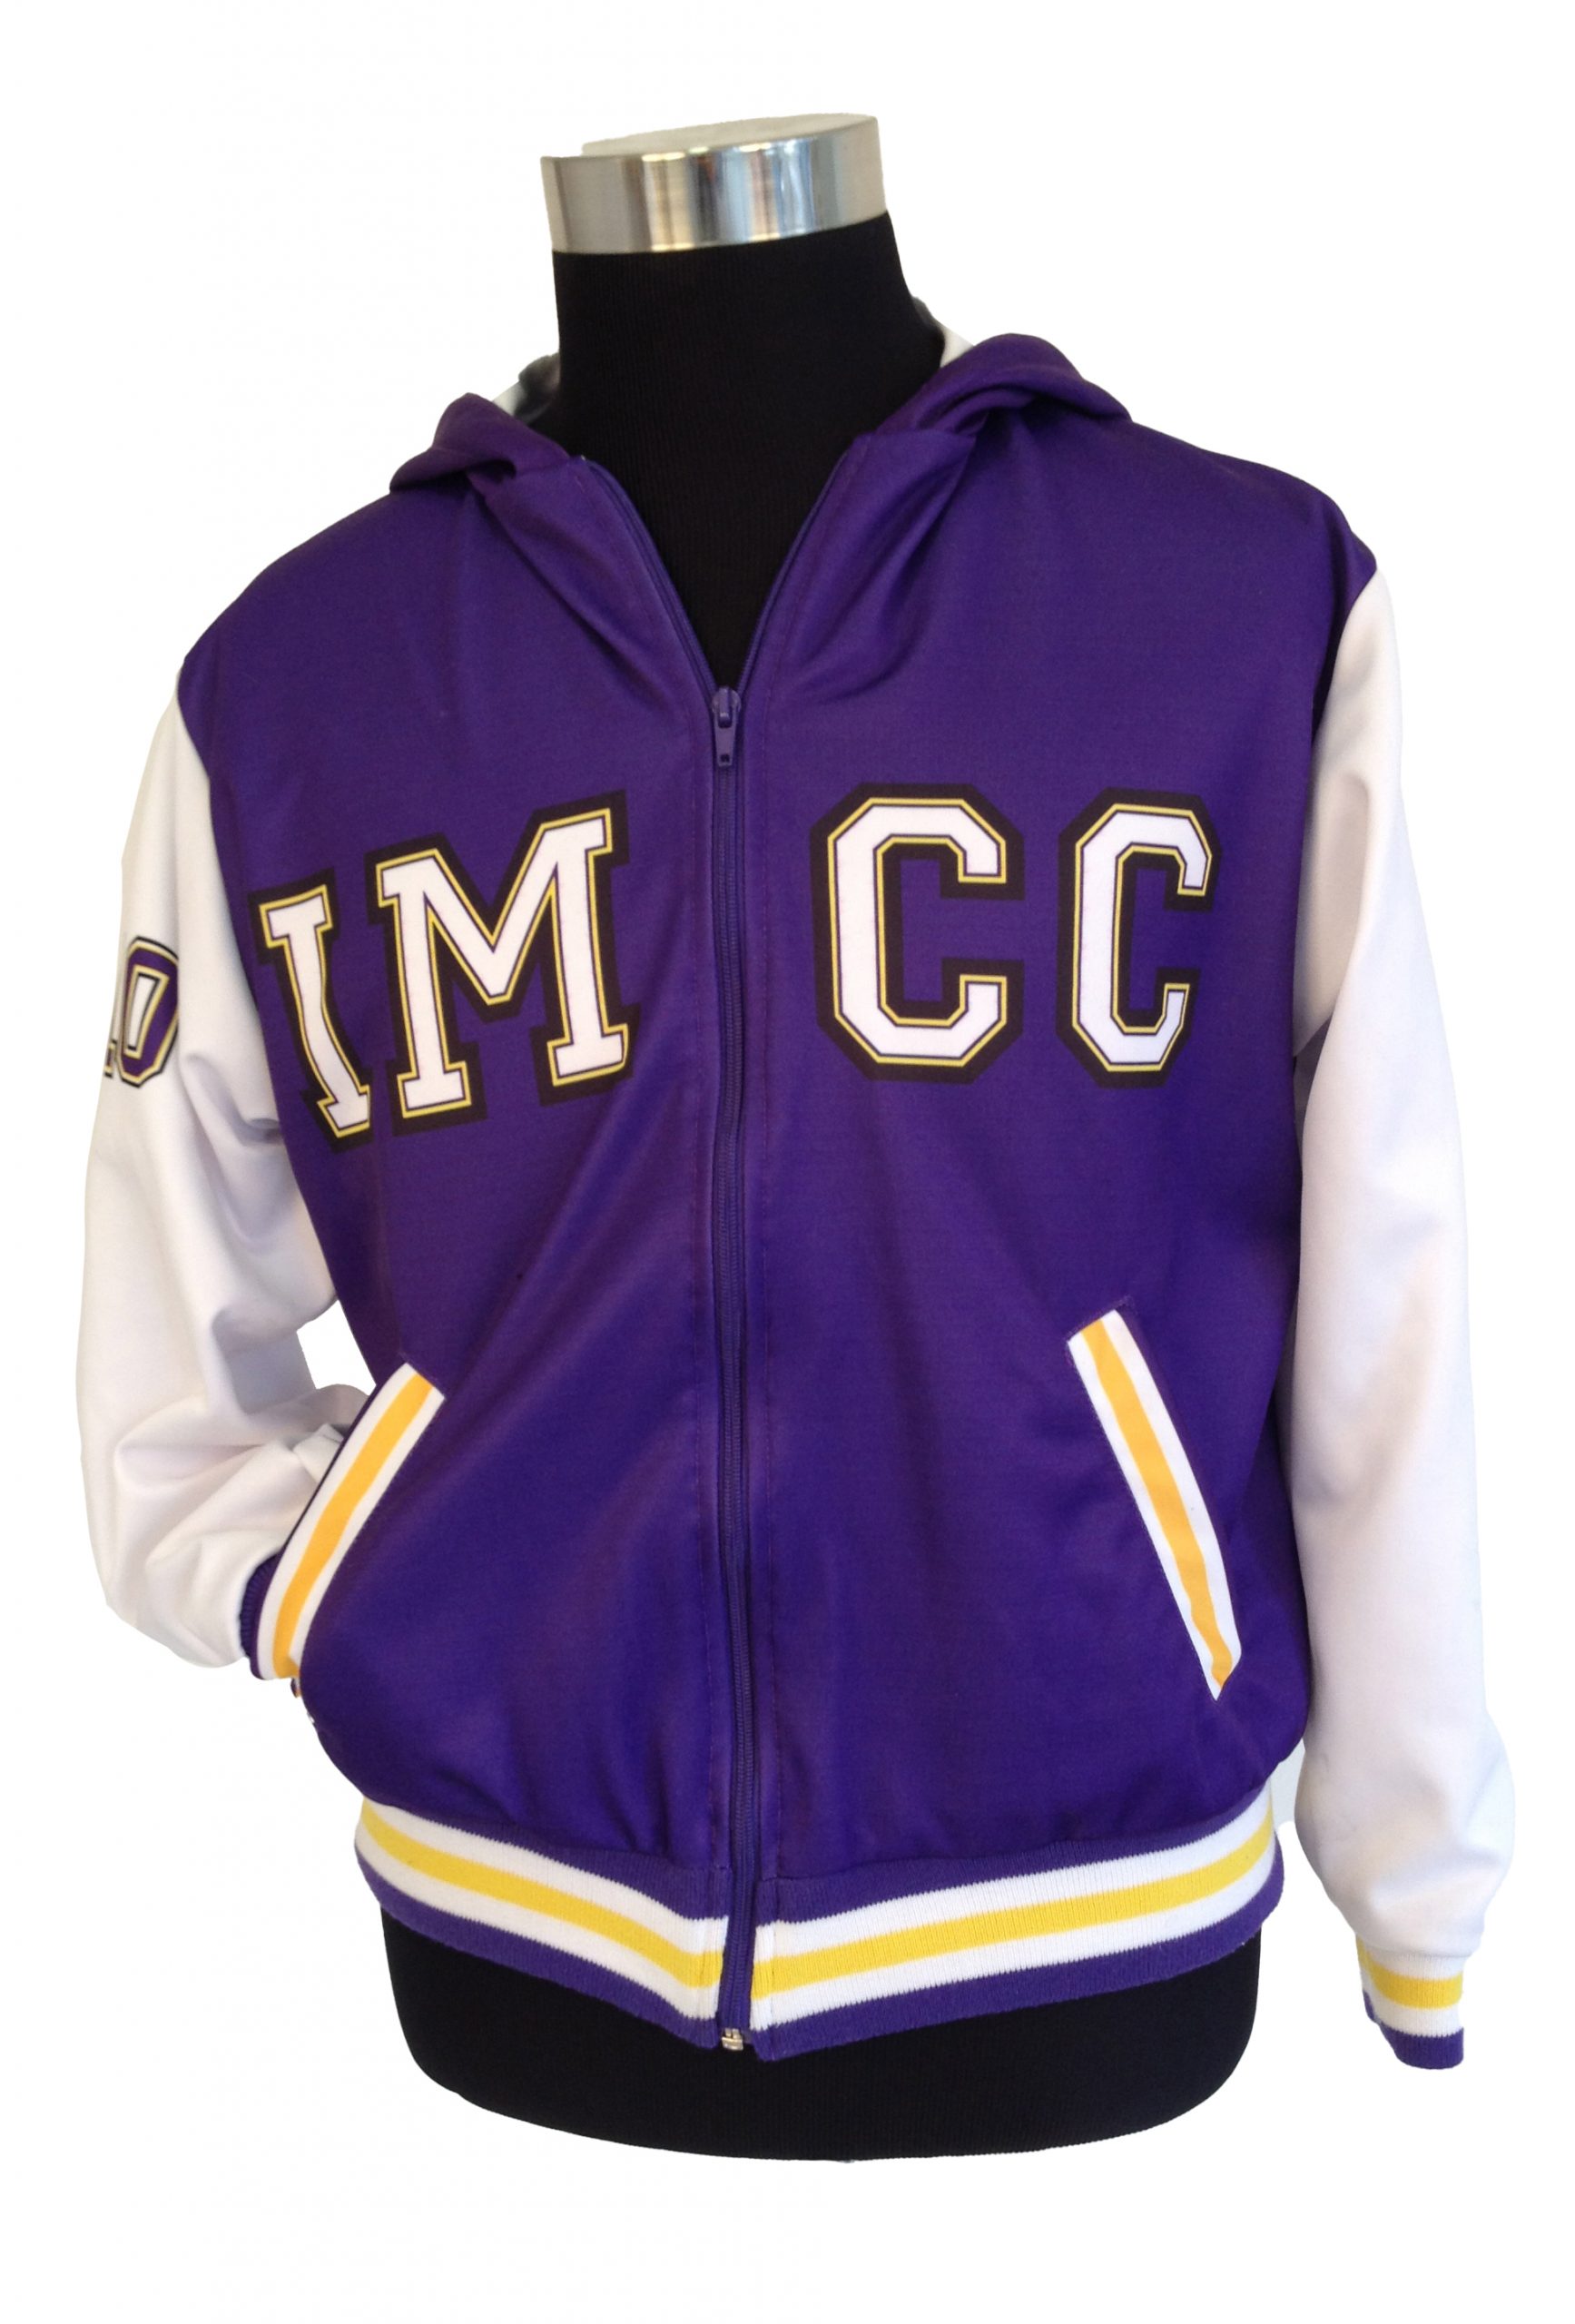 Varsity Jackets for sale in Cougal, New South Wales, Australia, Facebook  Marketplace